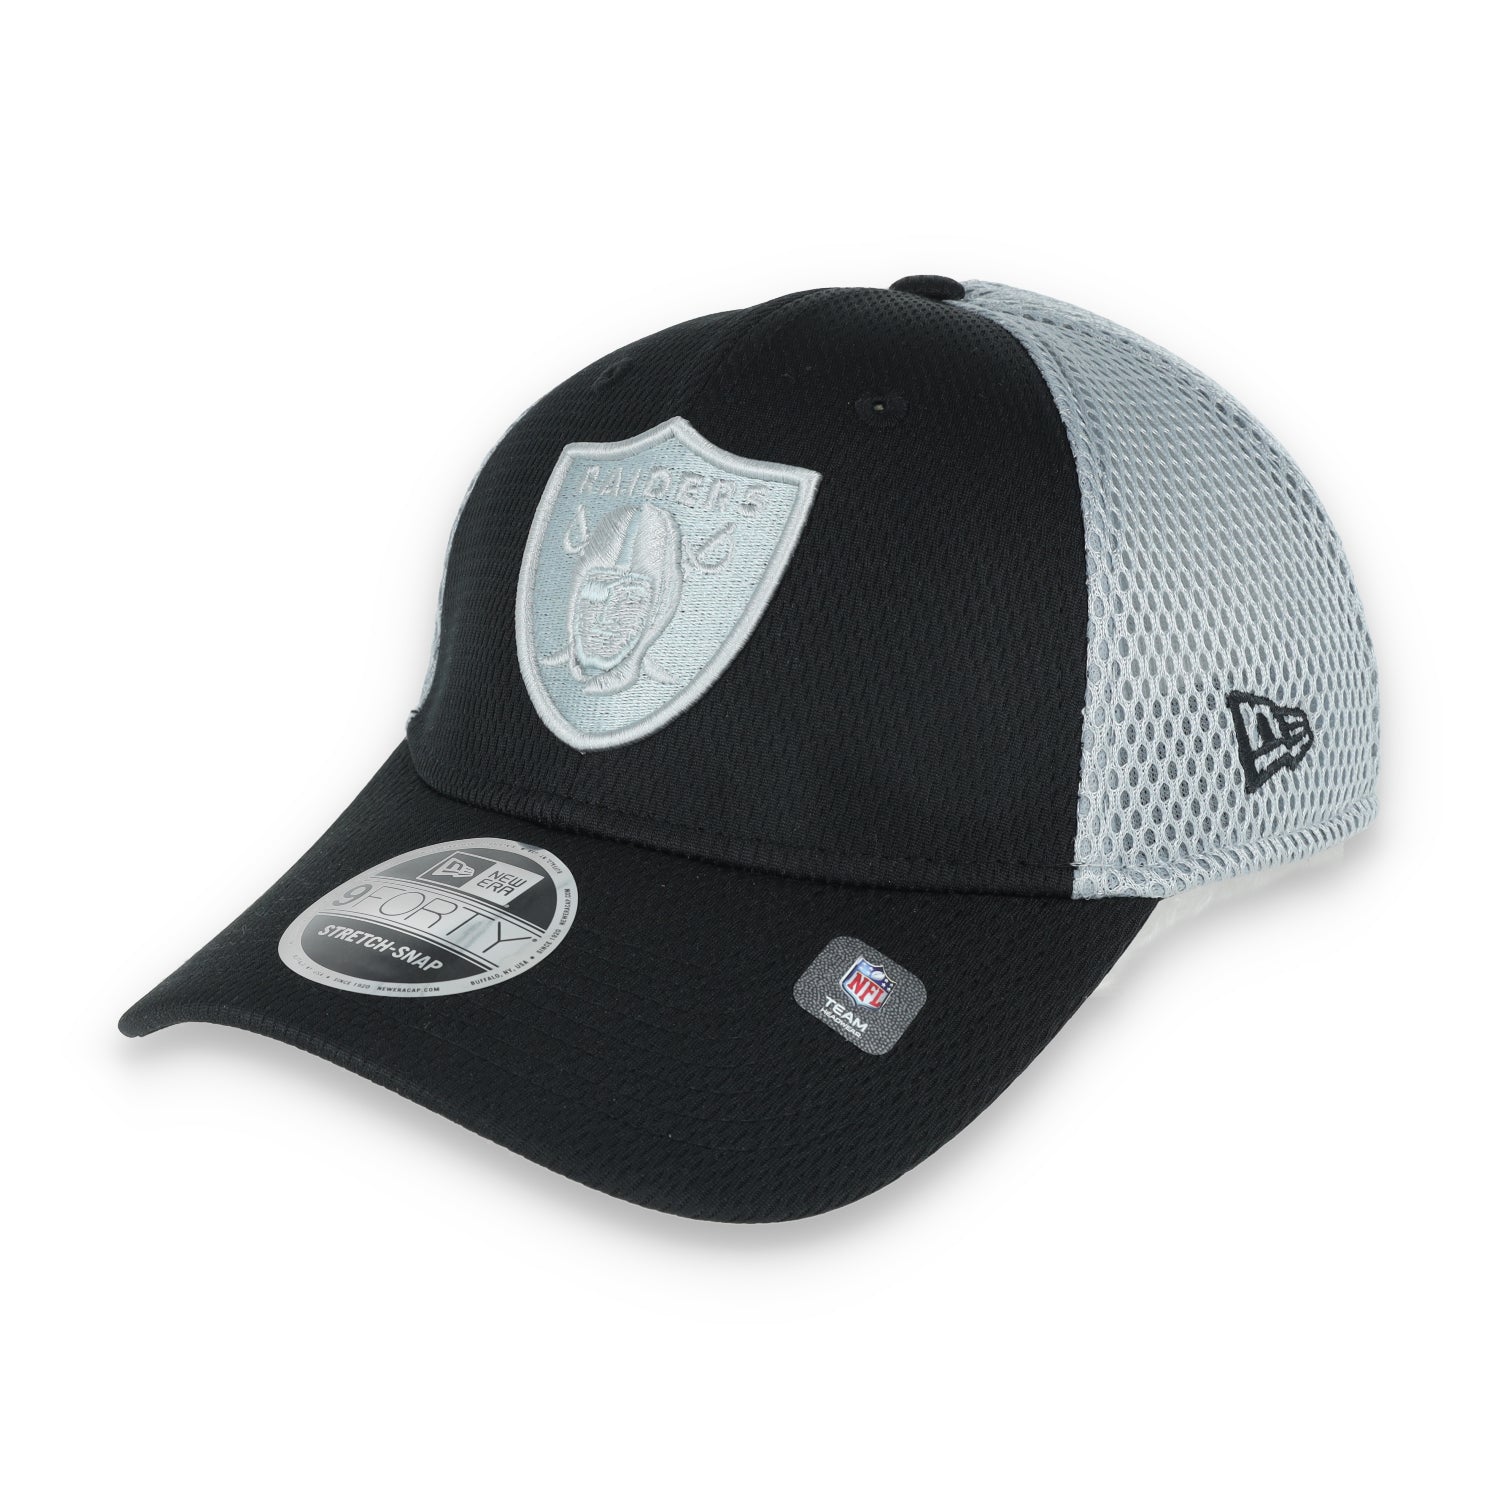 New Era Las Vegas Raiders Outline 9FORTY Stretch-Snap Hat